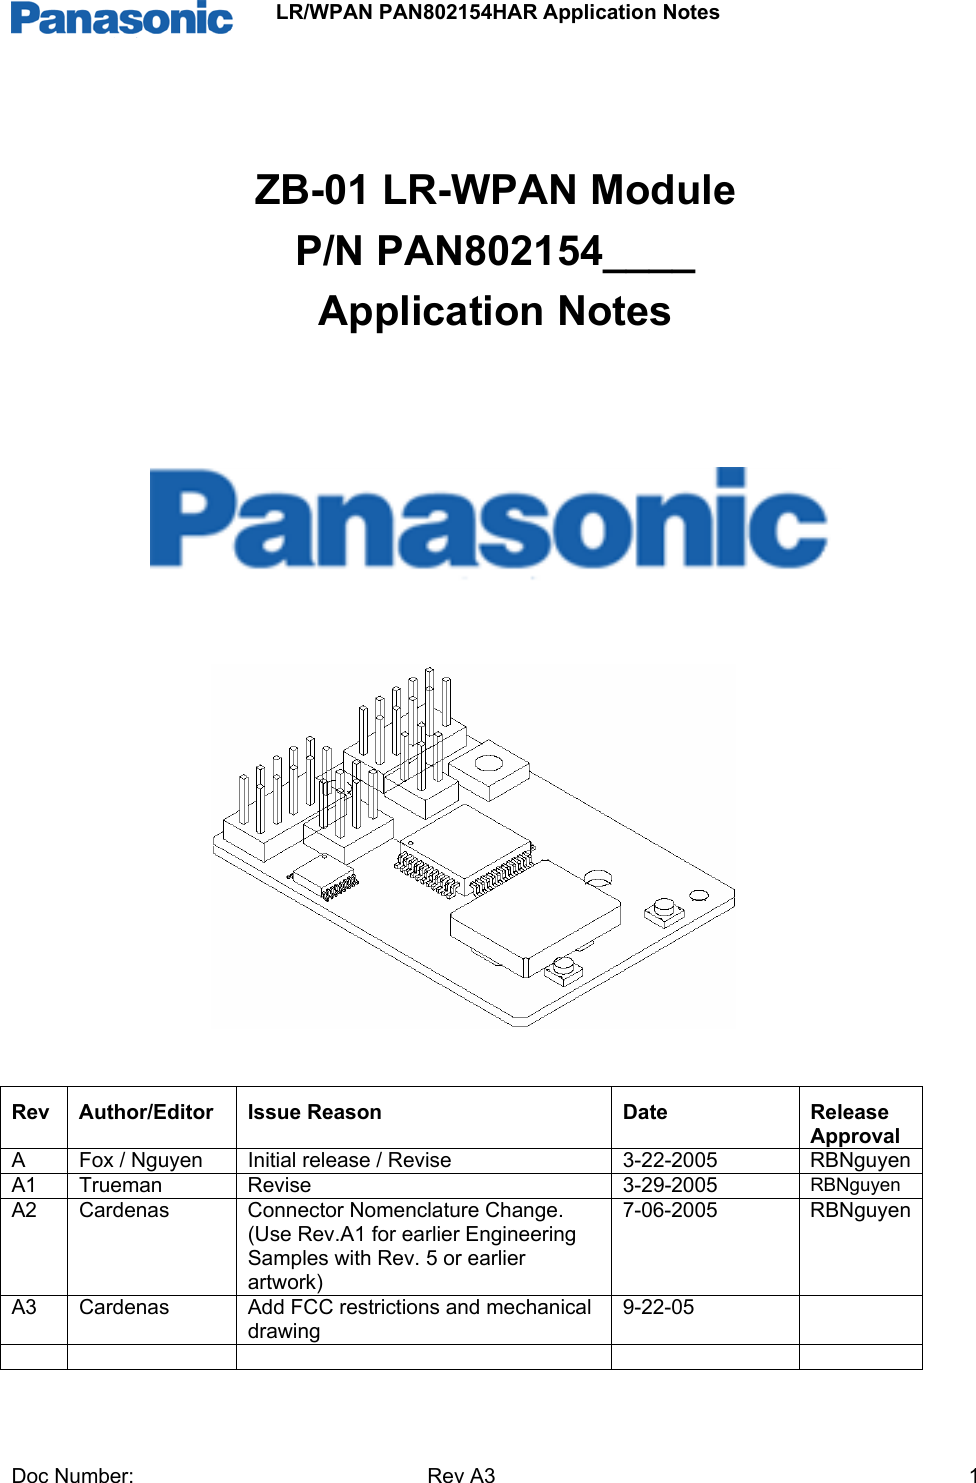                 LR/WPAN PAN802154HAR Application Notes Doc Number:   Rev A3    1    ZB-01 LR-WPAN Module  P/N PAN802154____ Application Notes                Rev Author/Editor  Issue Reason  Date  Release Approval A  Fox / Nguyen  Initial release / Revise  3-22-2005  RBNguyenA1 Trueman  Revise   3-29-2005  RBNguyen A2 Cardenas  Connector Nomenclature Change. (Use Rev.A1 for earlier Engineering Samples with Rev. 5 or earlier artwork) 7-06-2005 RBNguyenA3  Cardenas  Add FCC restrictions and mechanical drawing 9-22-05           